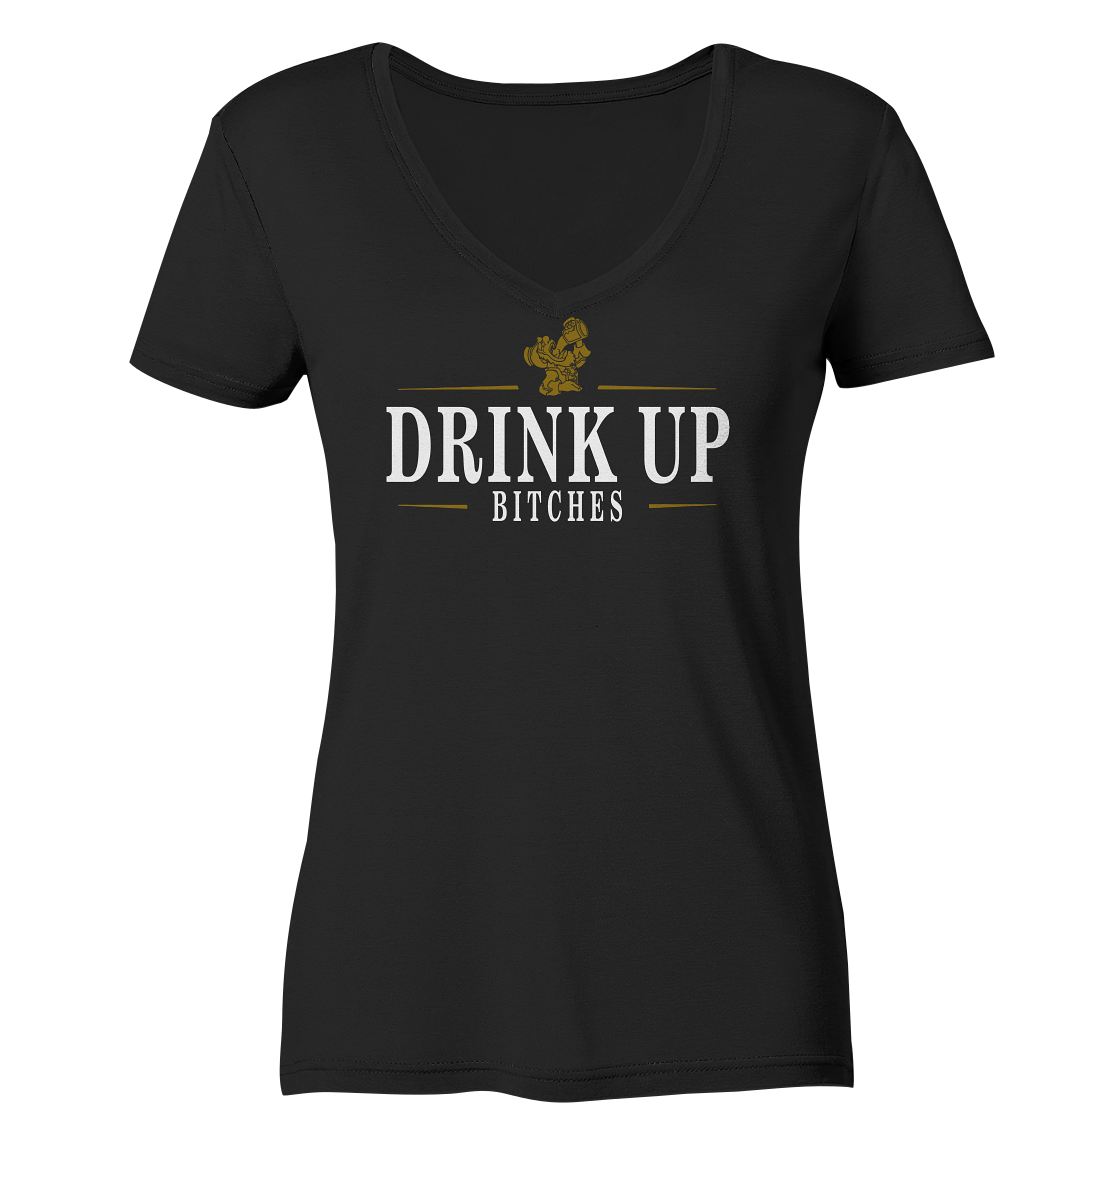 Drink Up "Bitches" - Ladies V-Neck Shirt